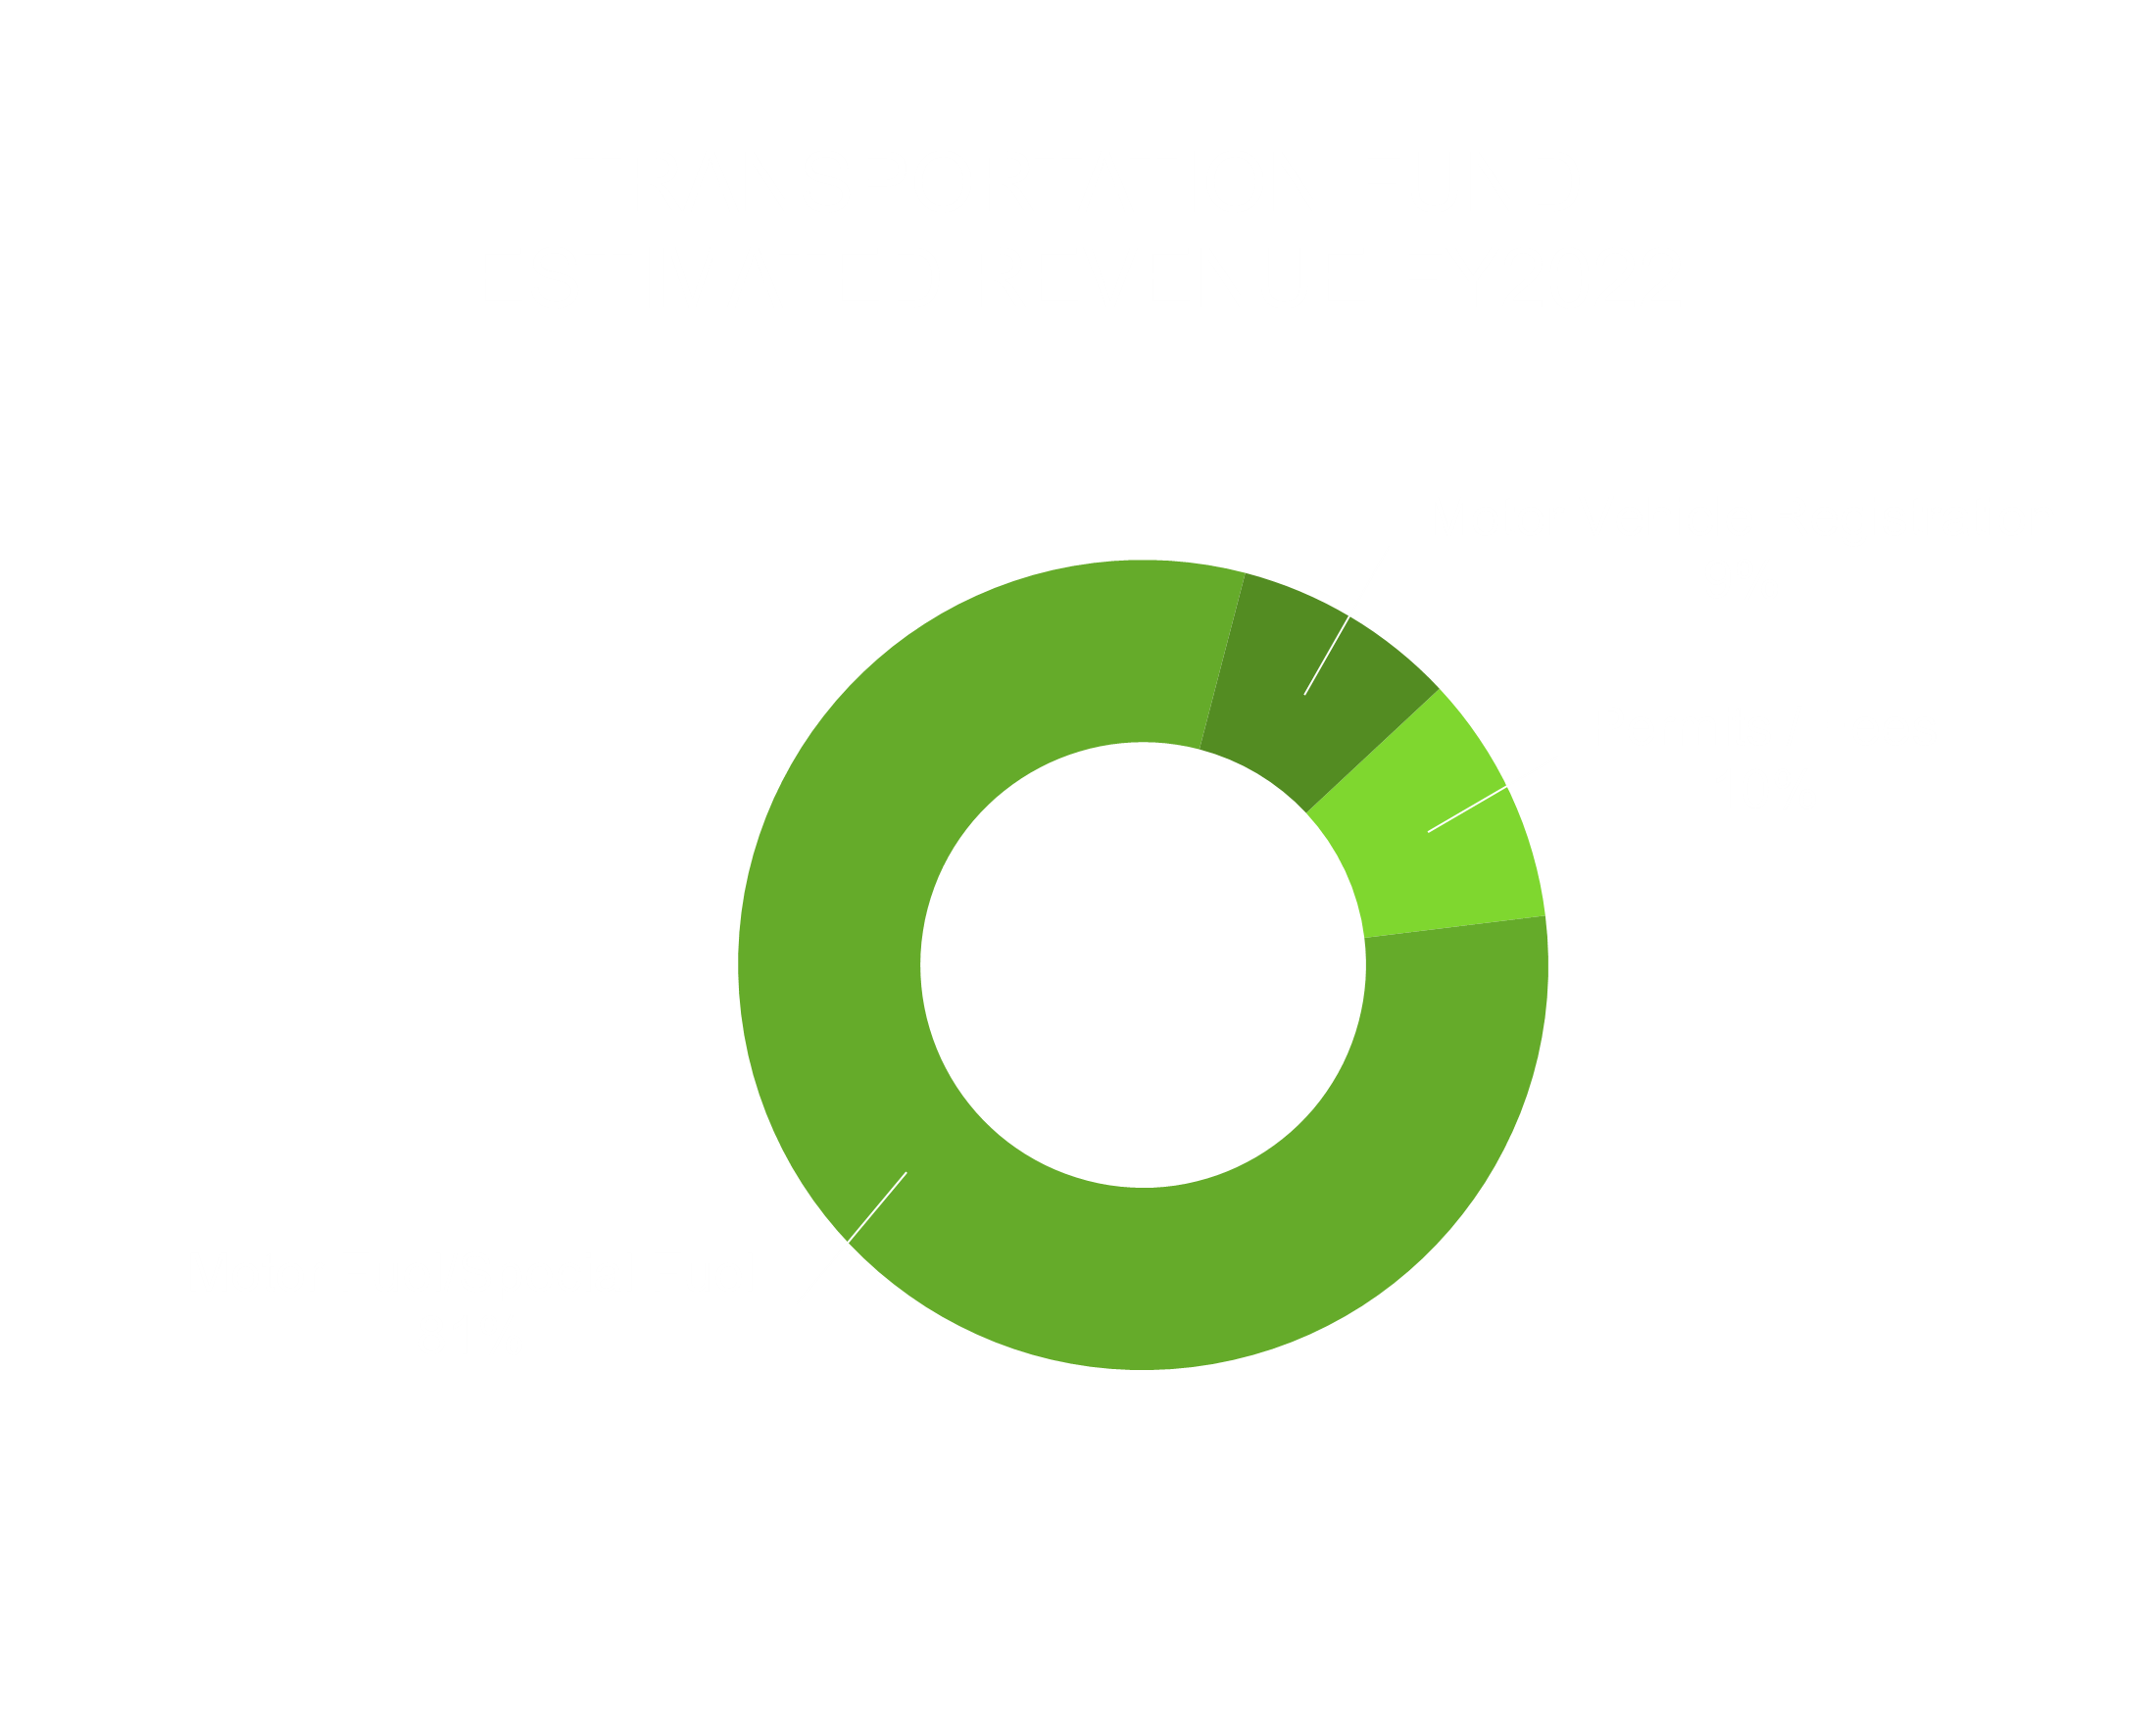 Transportation Investment Fund Estimated Revenue chart shows that the total funds equal $597806885. 84% of that total comes from motor fuel or special fuel. 8% comes from motor vehicle registration and another 8% comes from permits and fees.